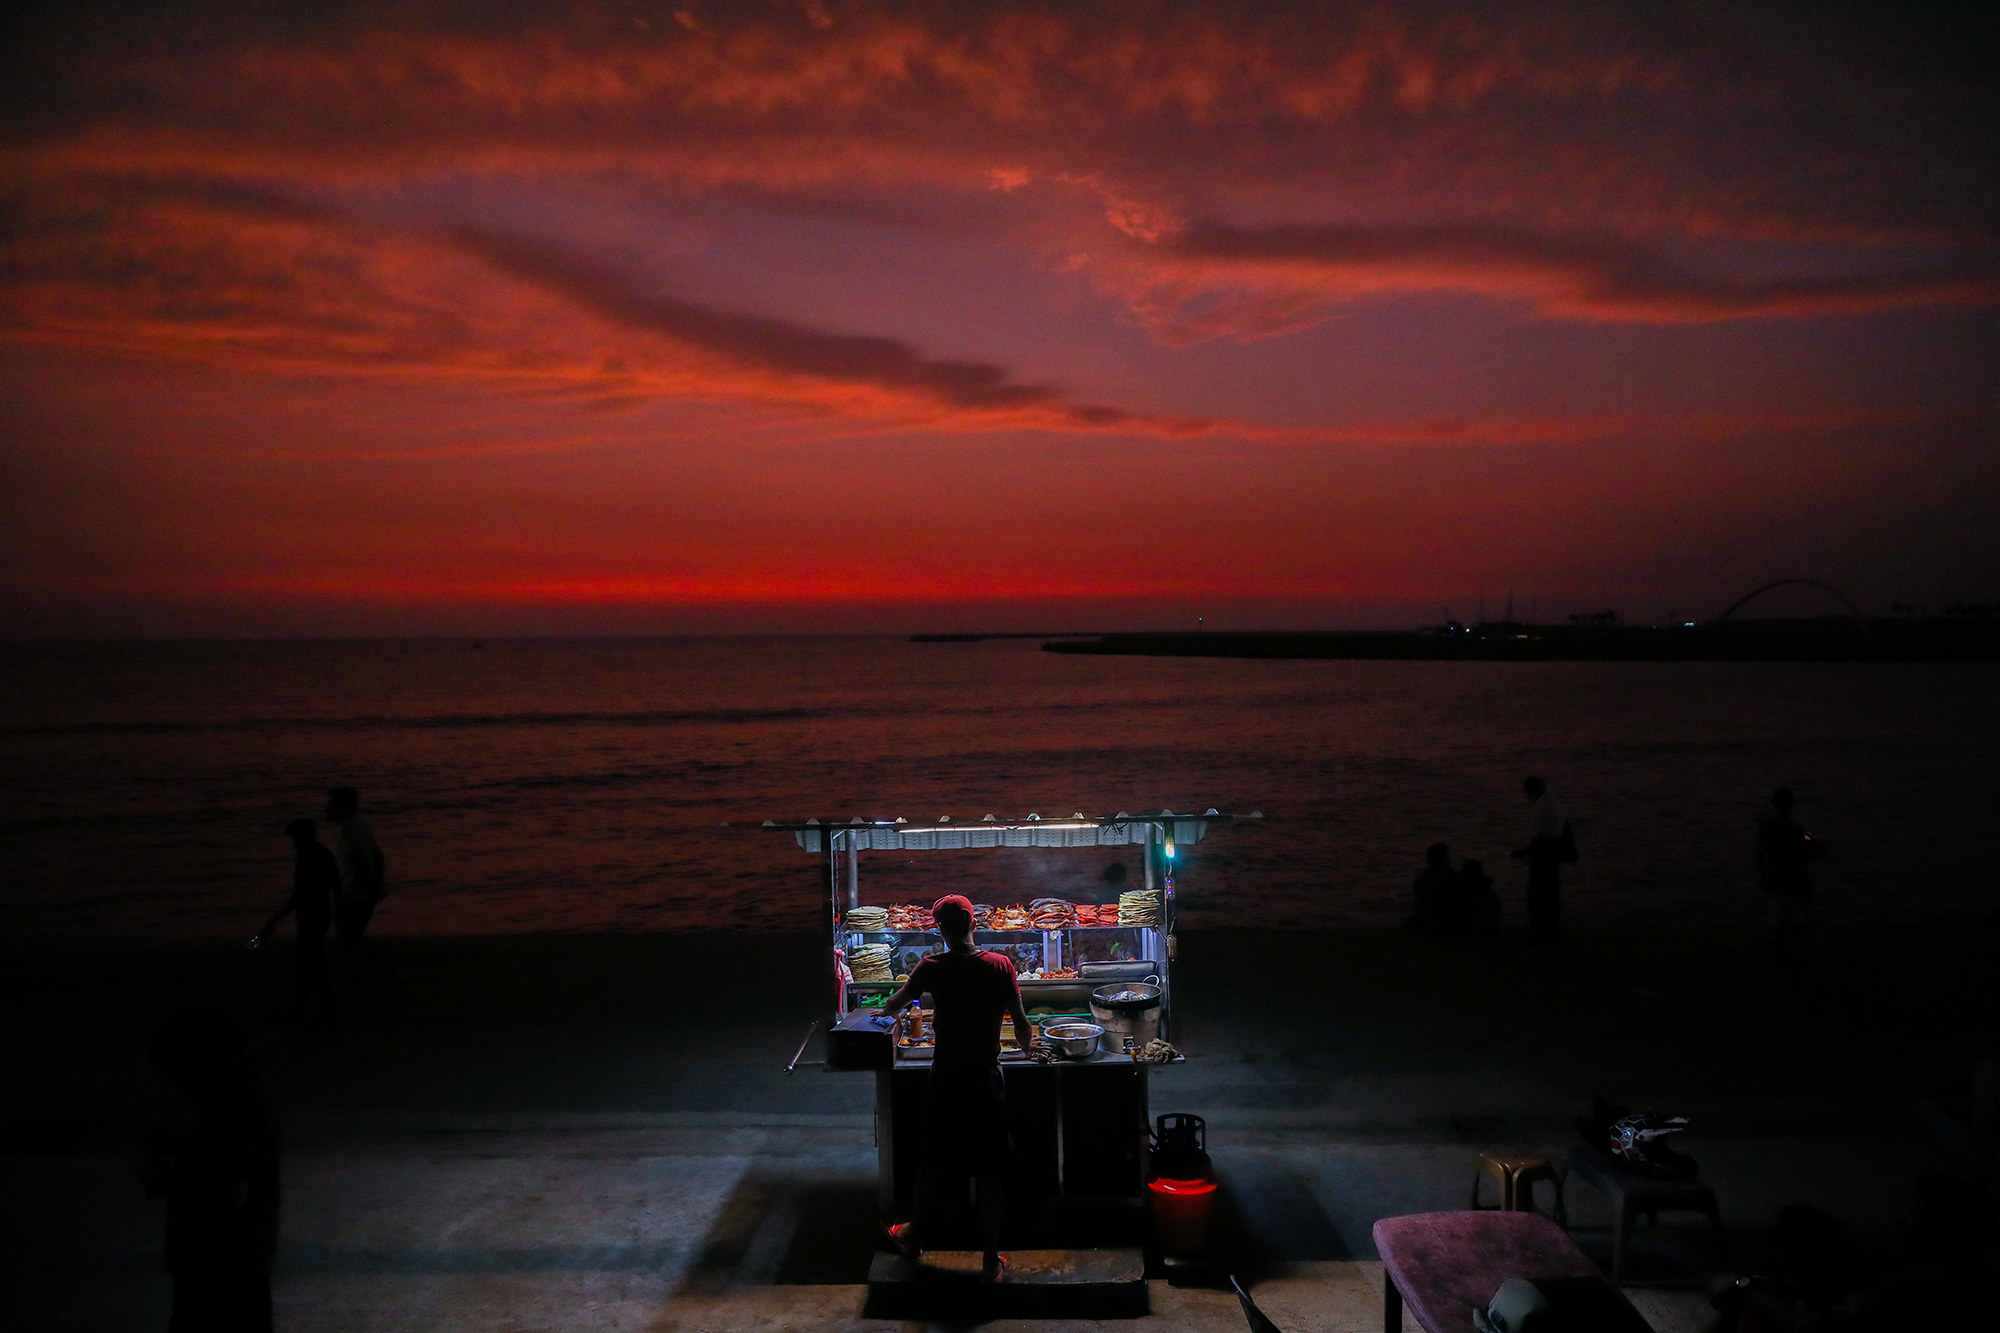 A dark red sunset on the water; in the foreground, the outline of a street vendor is lit up by his food cart